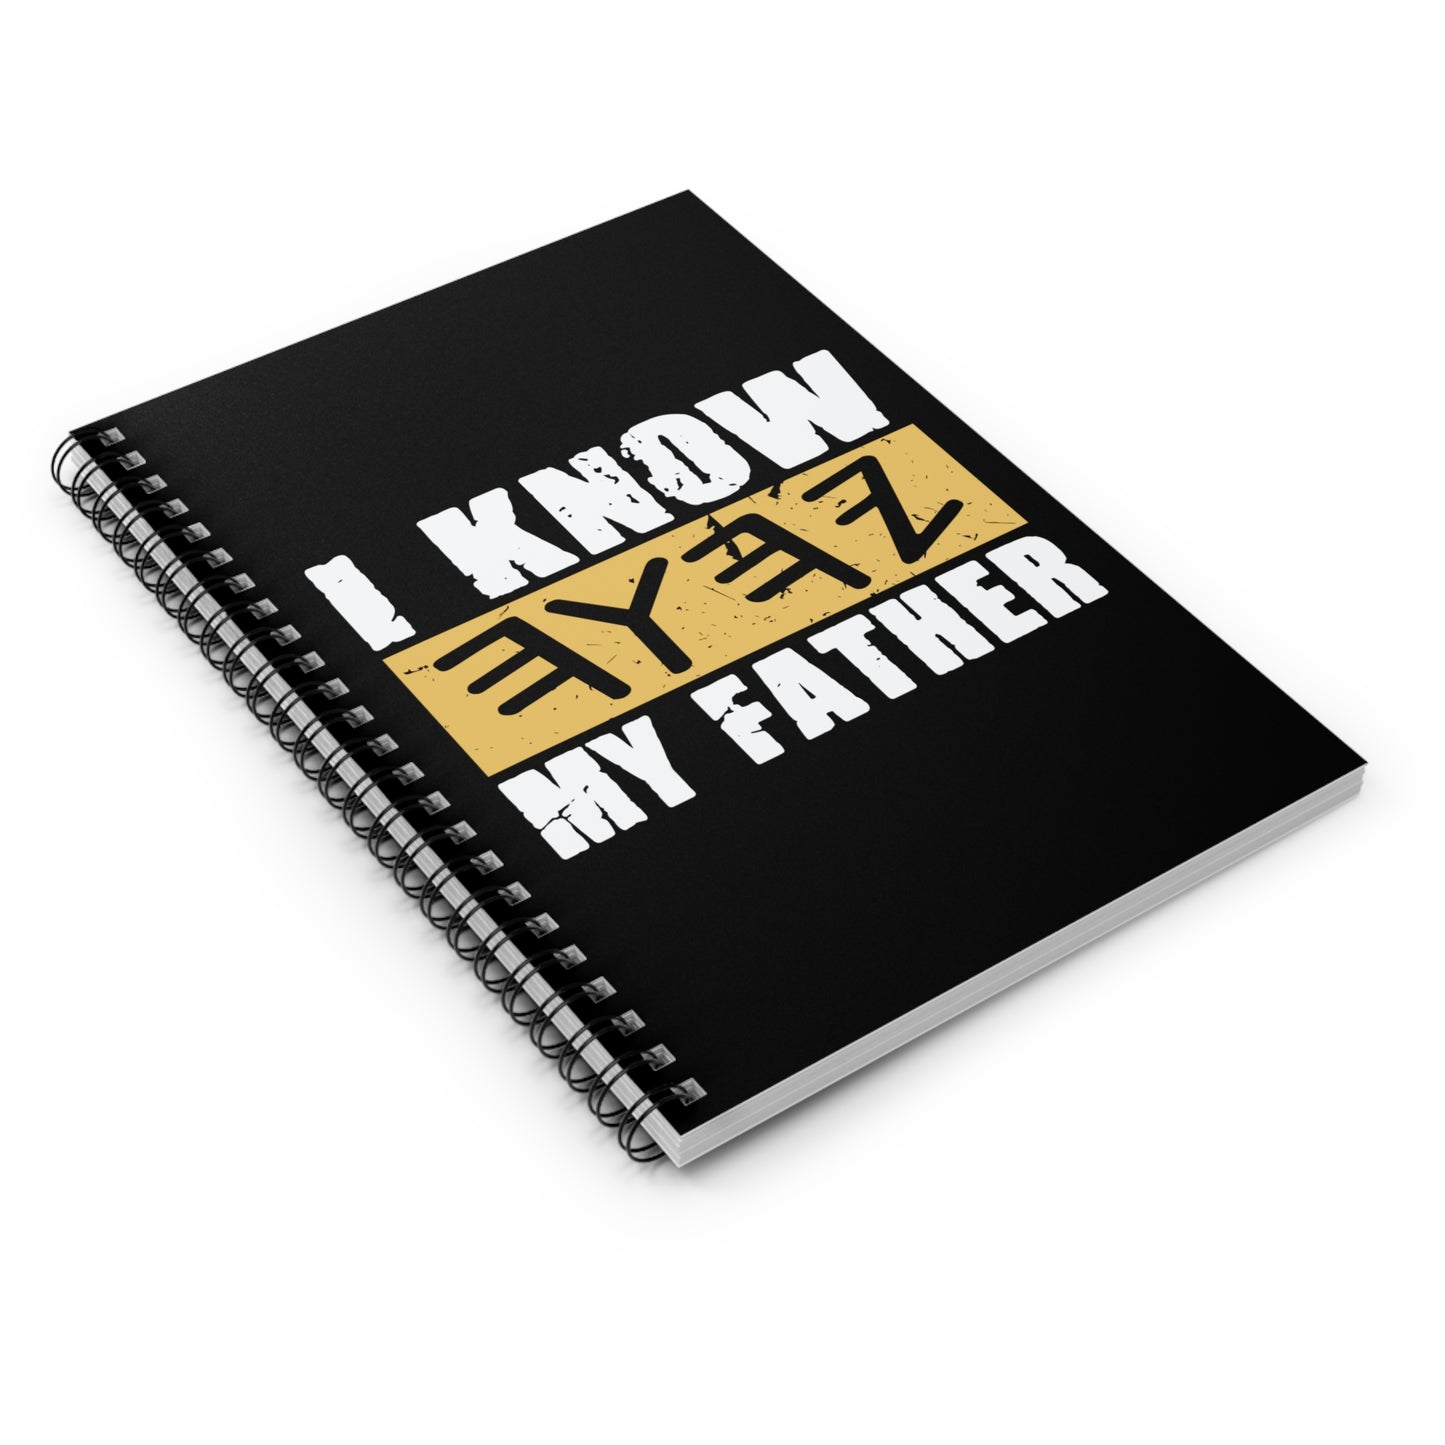 I Know My Father Spiral Notebook Prayer Journal -118 pages Ruled Line